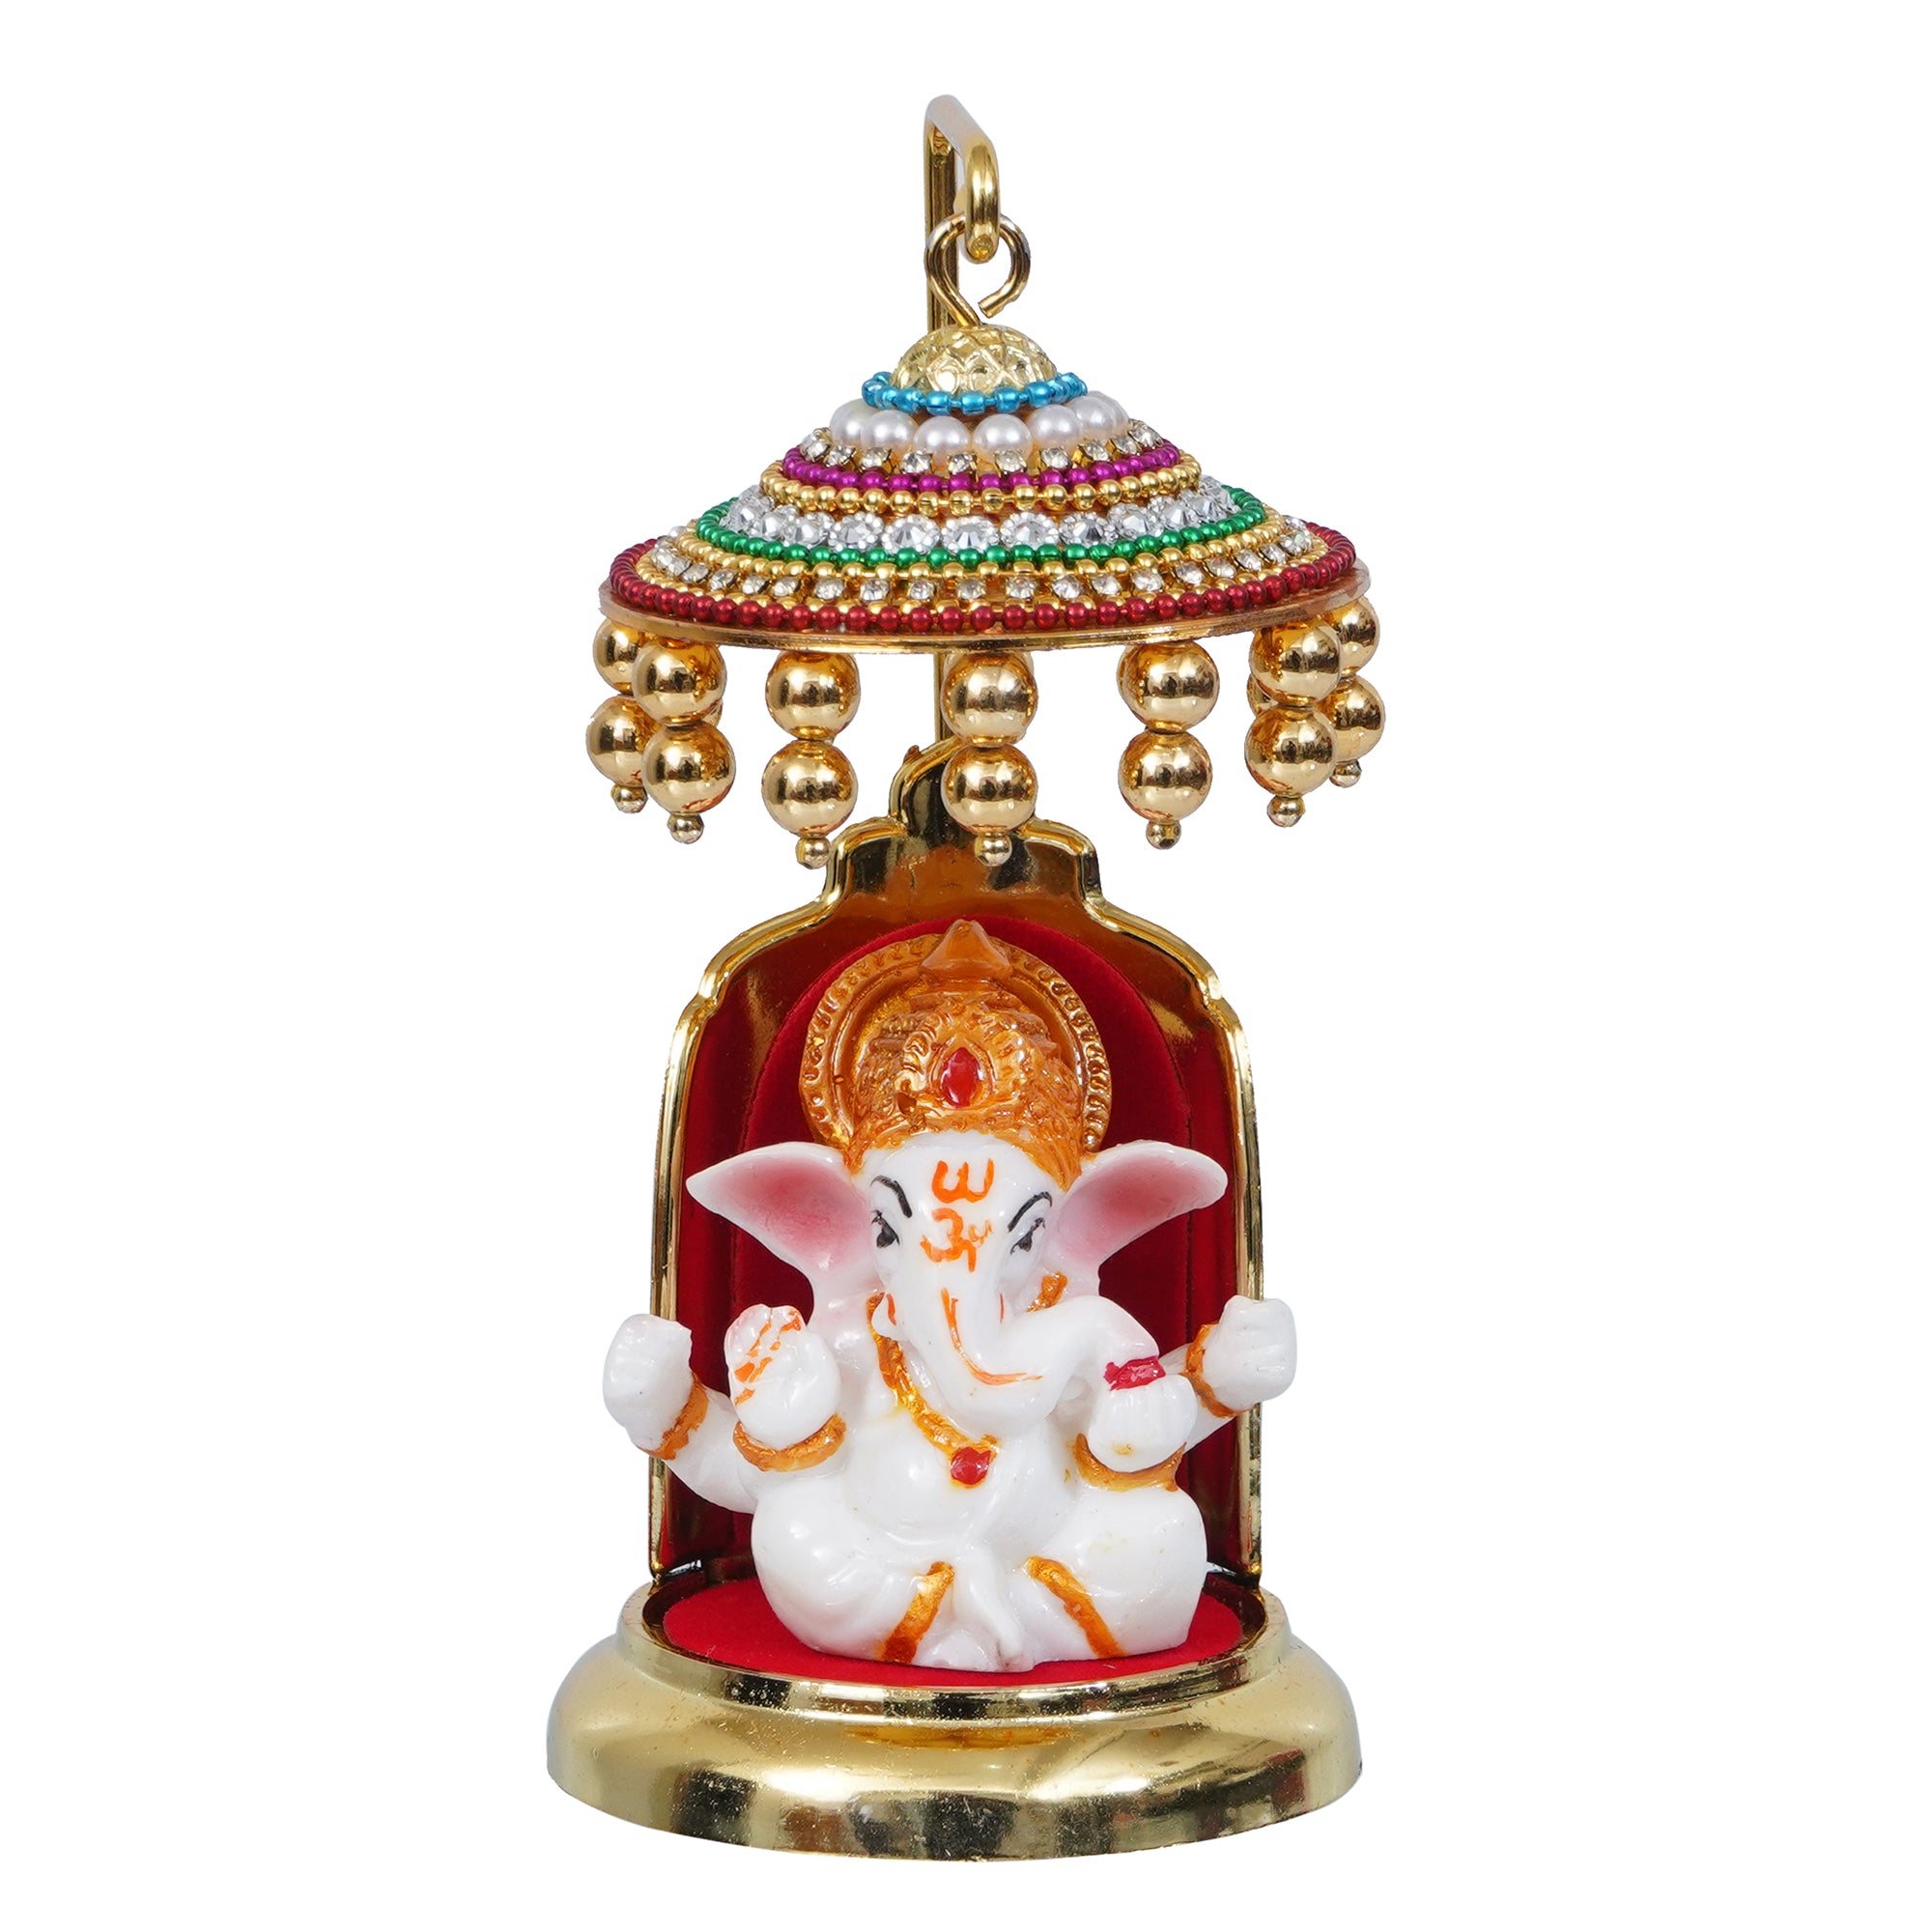 Decorative Lord Ganesha Idol with Designer Chatri for Car Dashboard, Home Temple and Office Desks 2